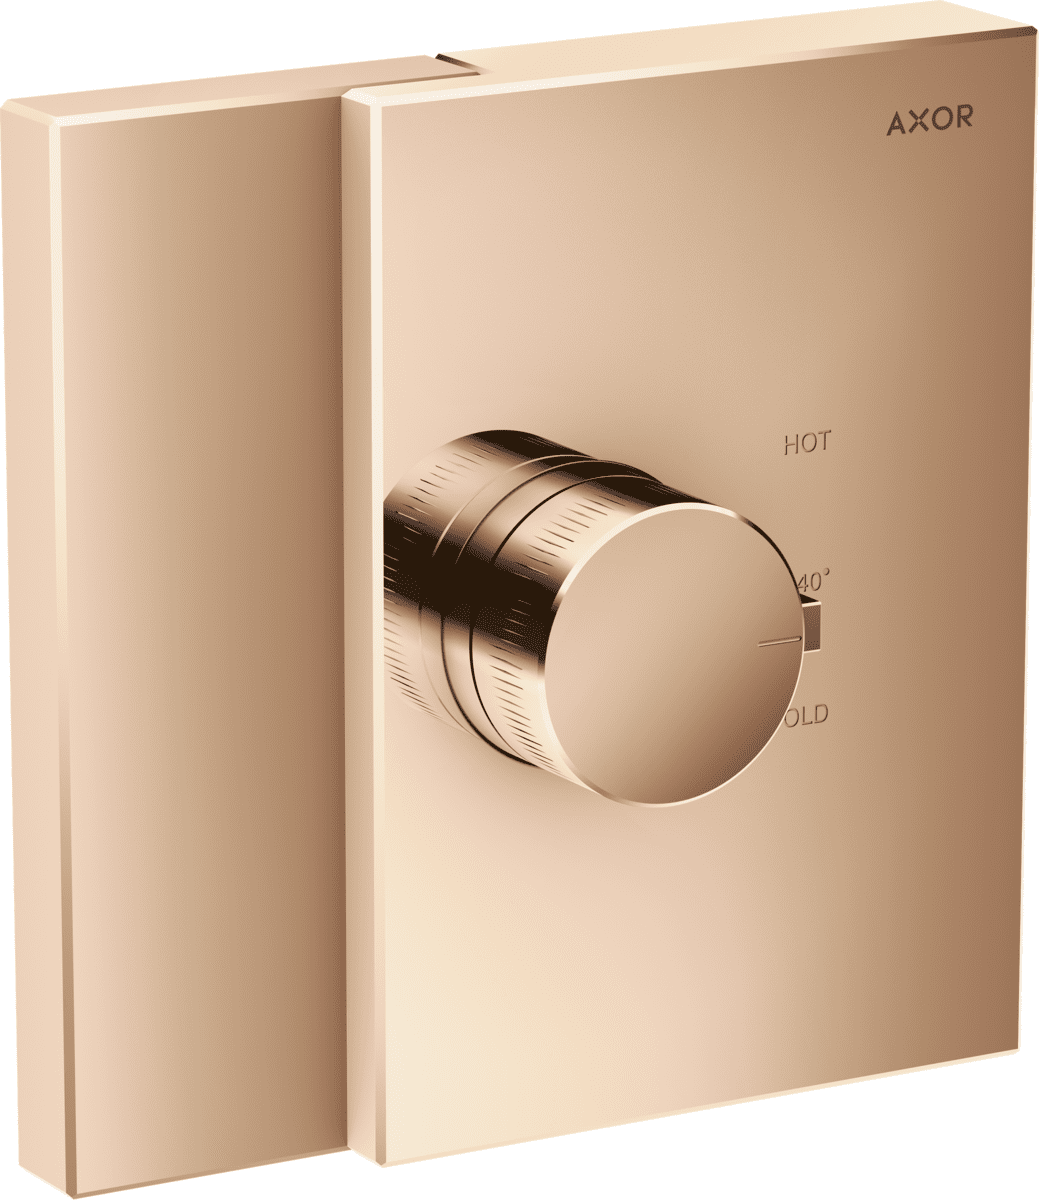 Picture of HANSGROHE AXOR Edge Thermostat HighFlow for concealed installation #46740300 - Polished Red Gold